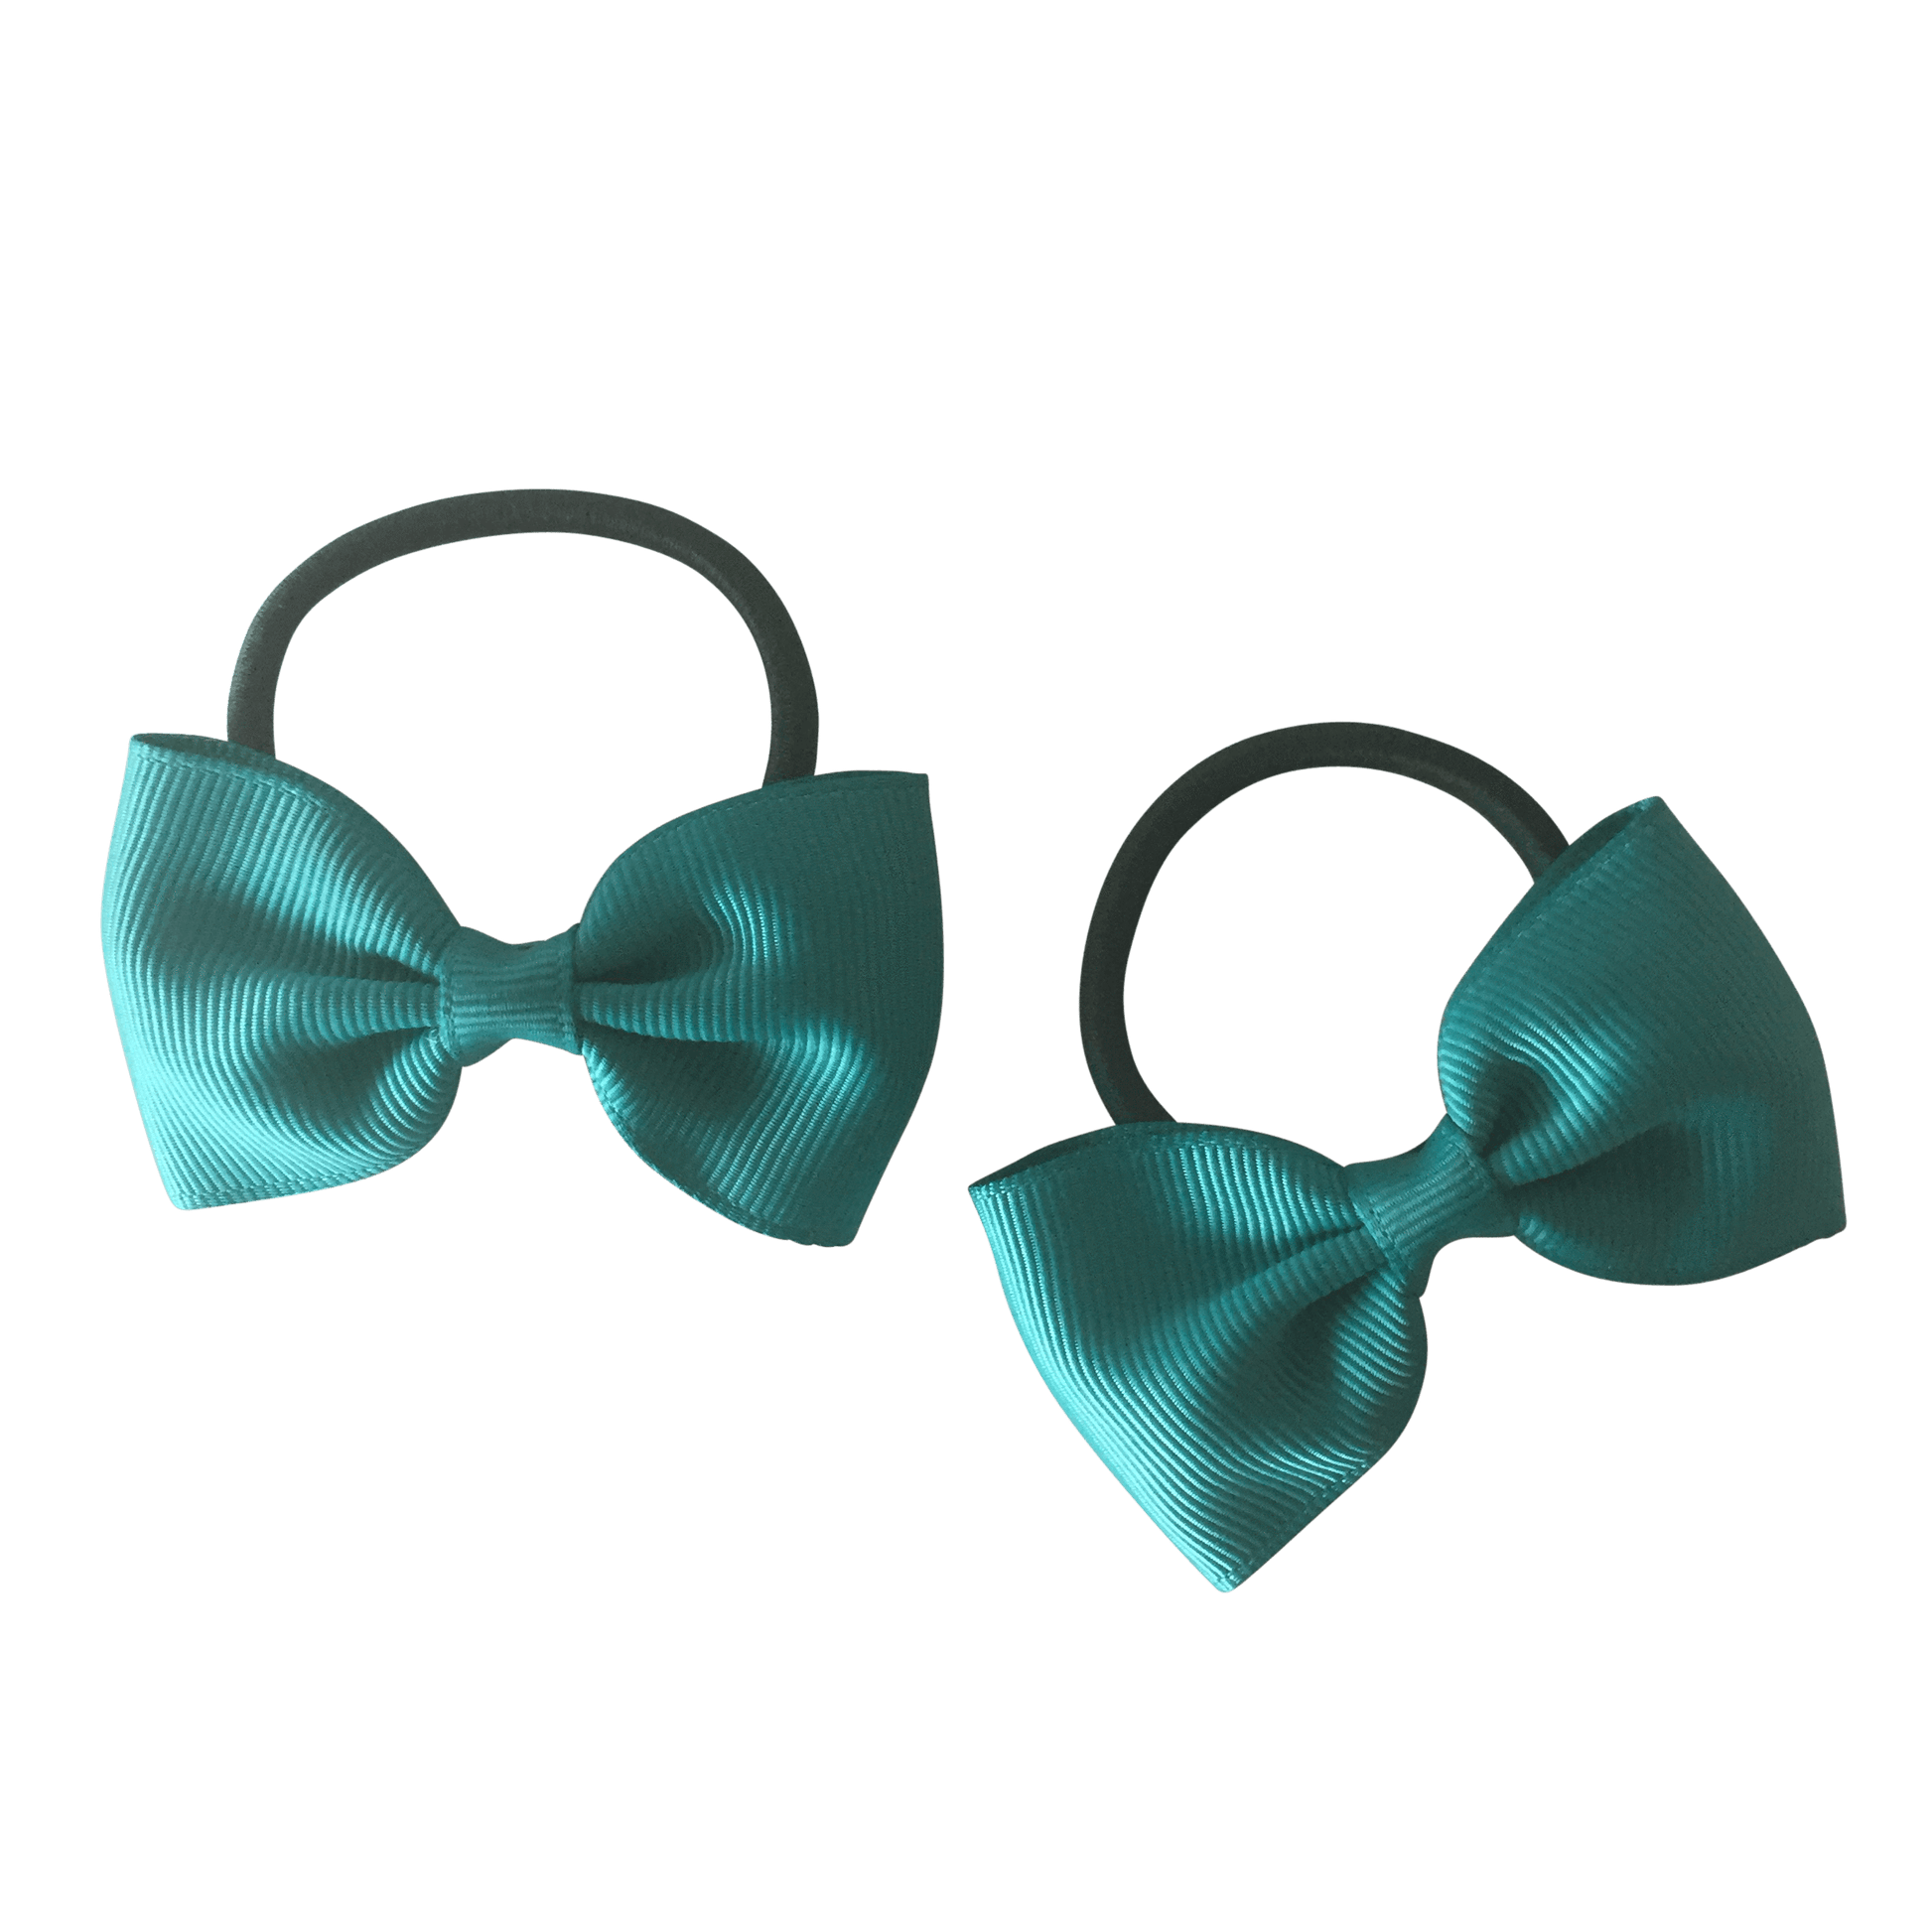 Jade Hair Accessories - Ponytails and Fairytales